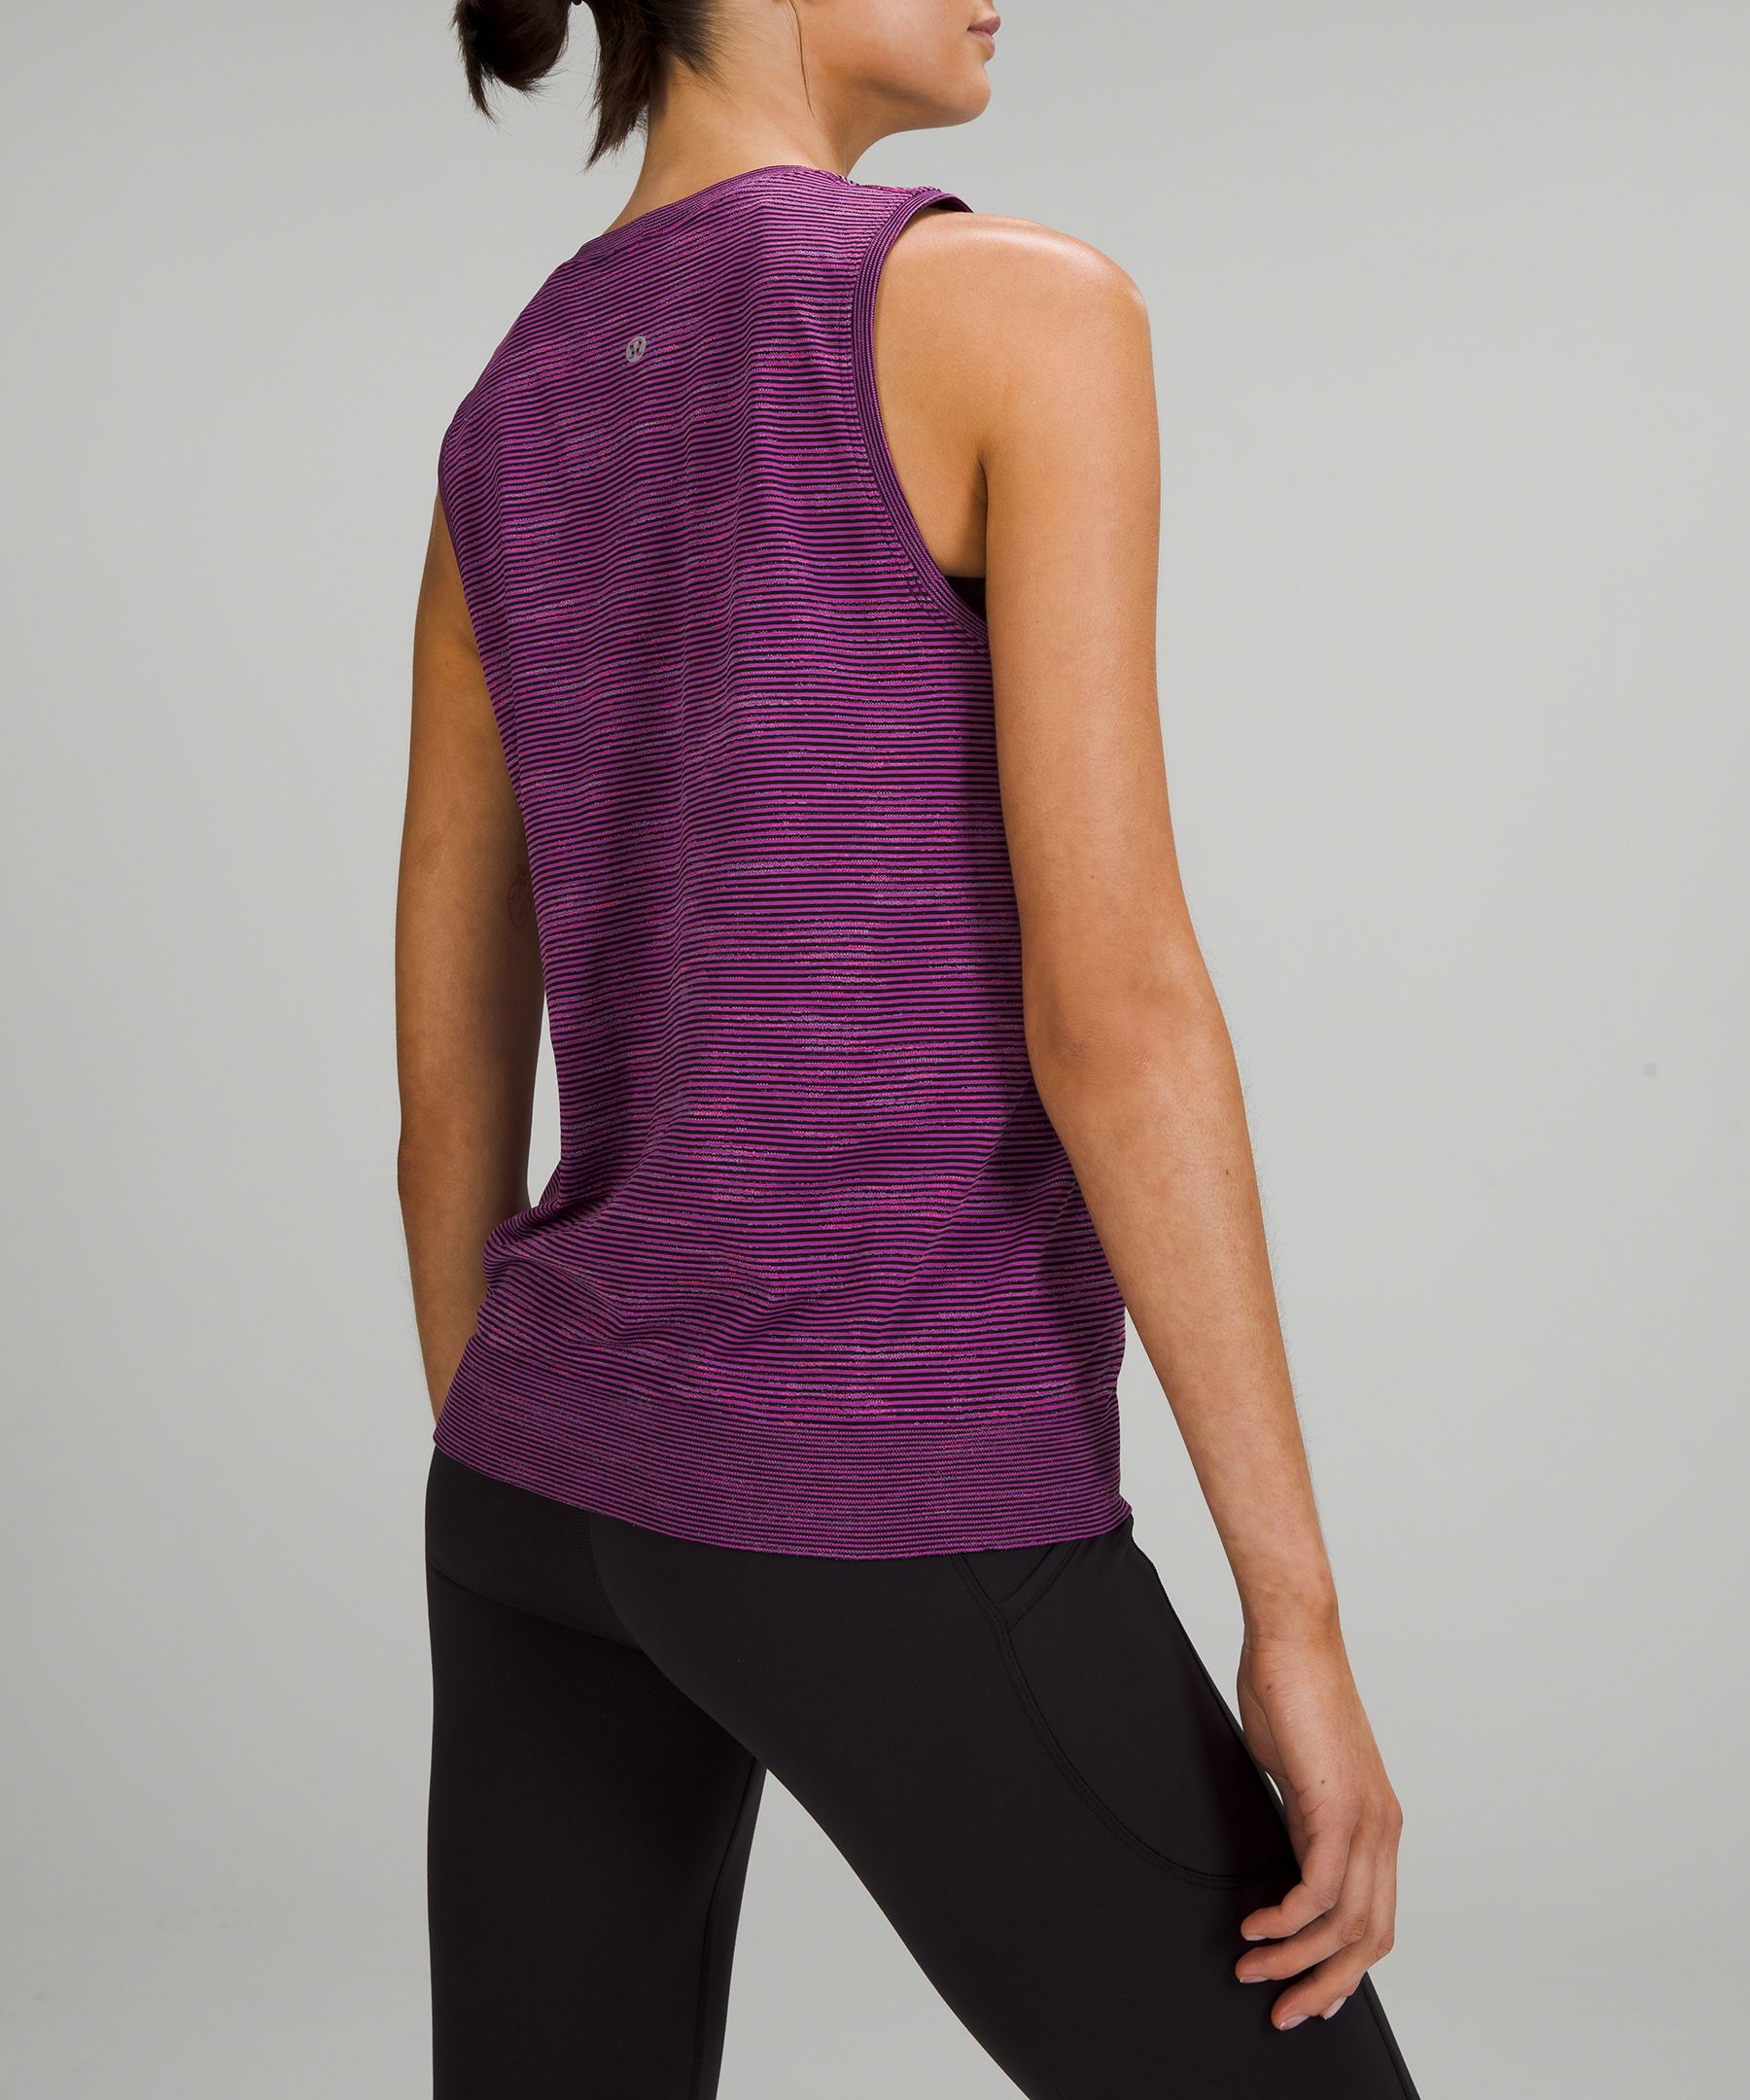 Swiftly Relaxed Muscle Tank Top | Women's Sleeveless & Tank Tops 